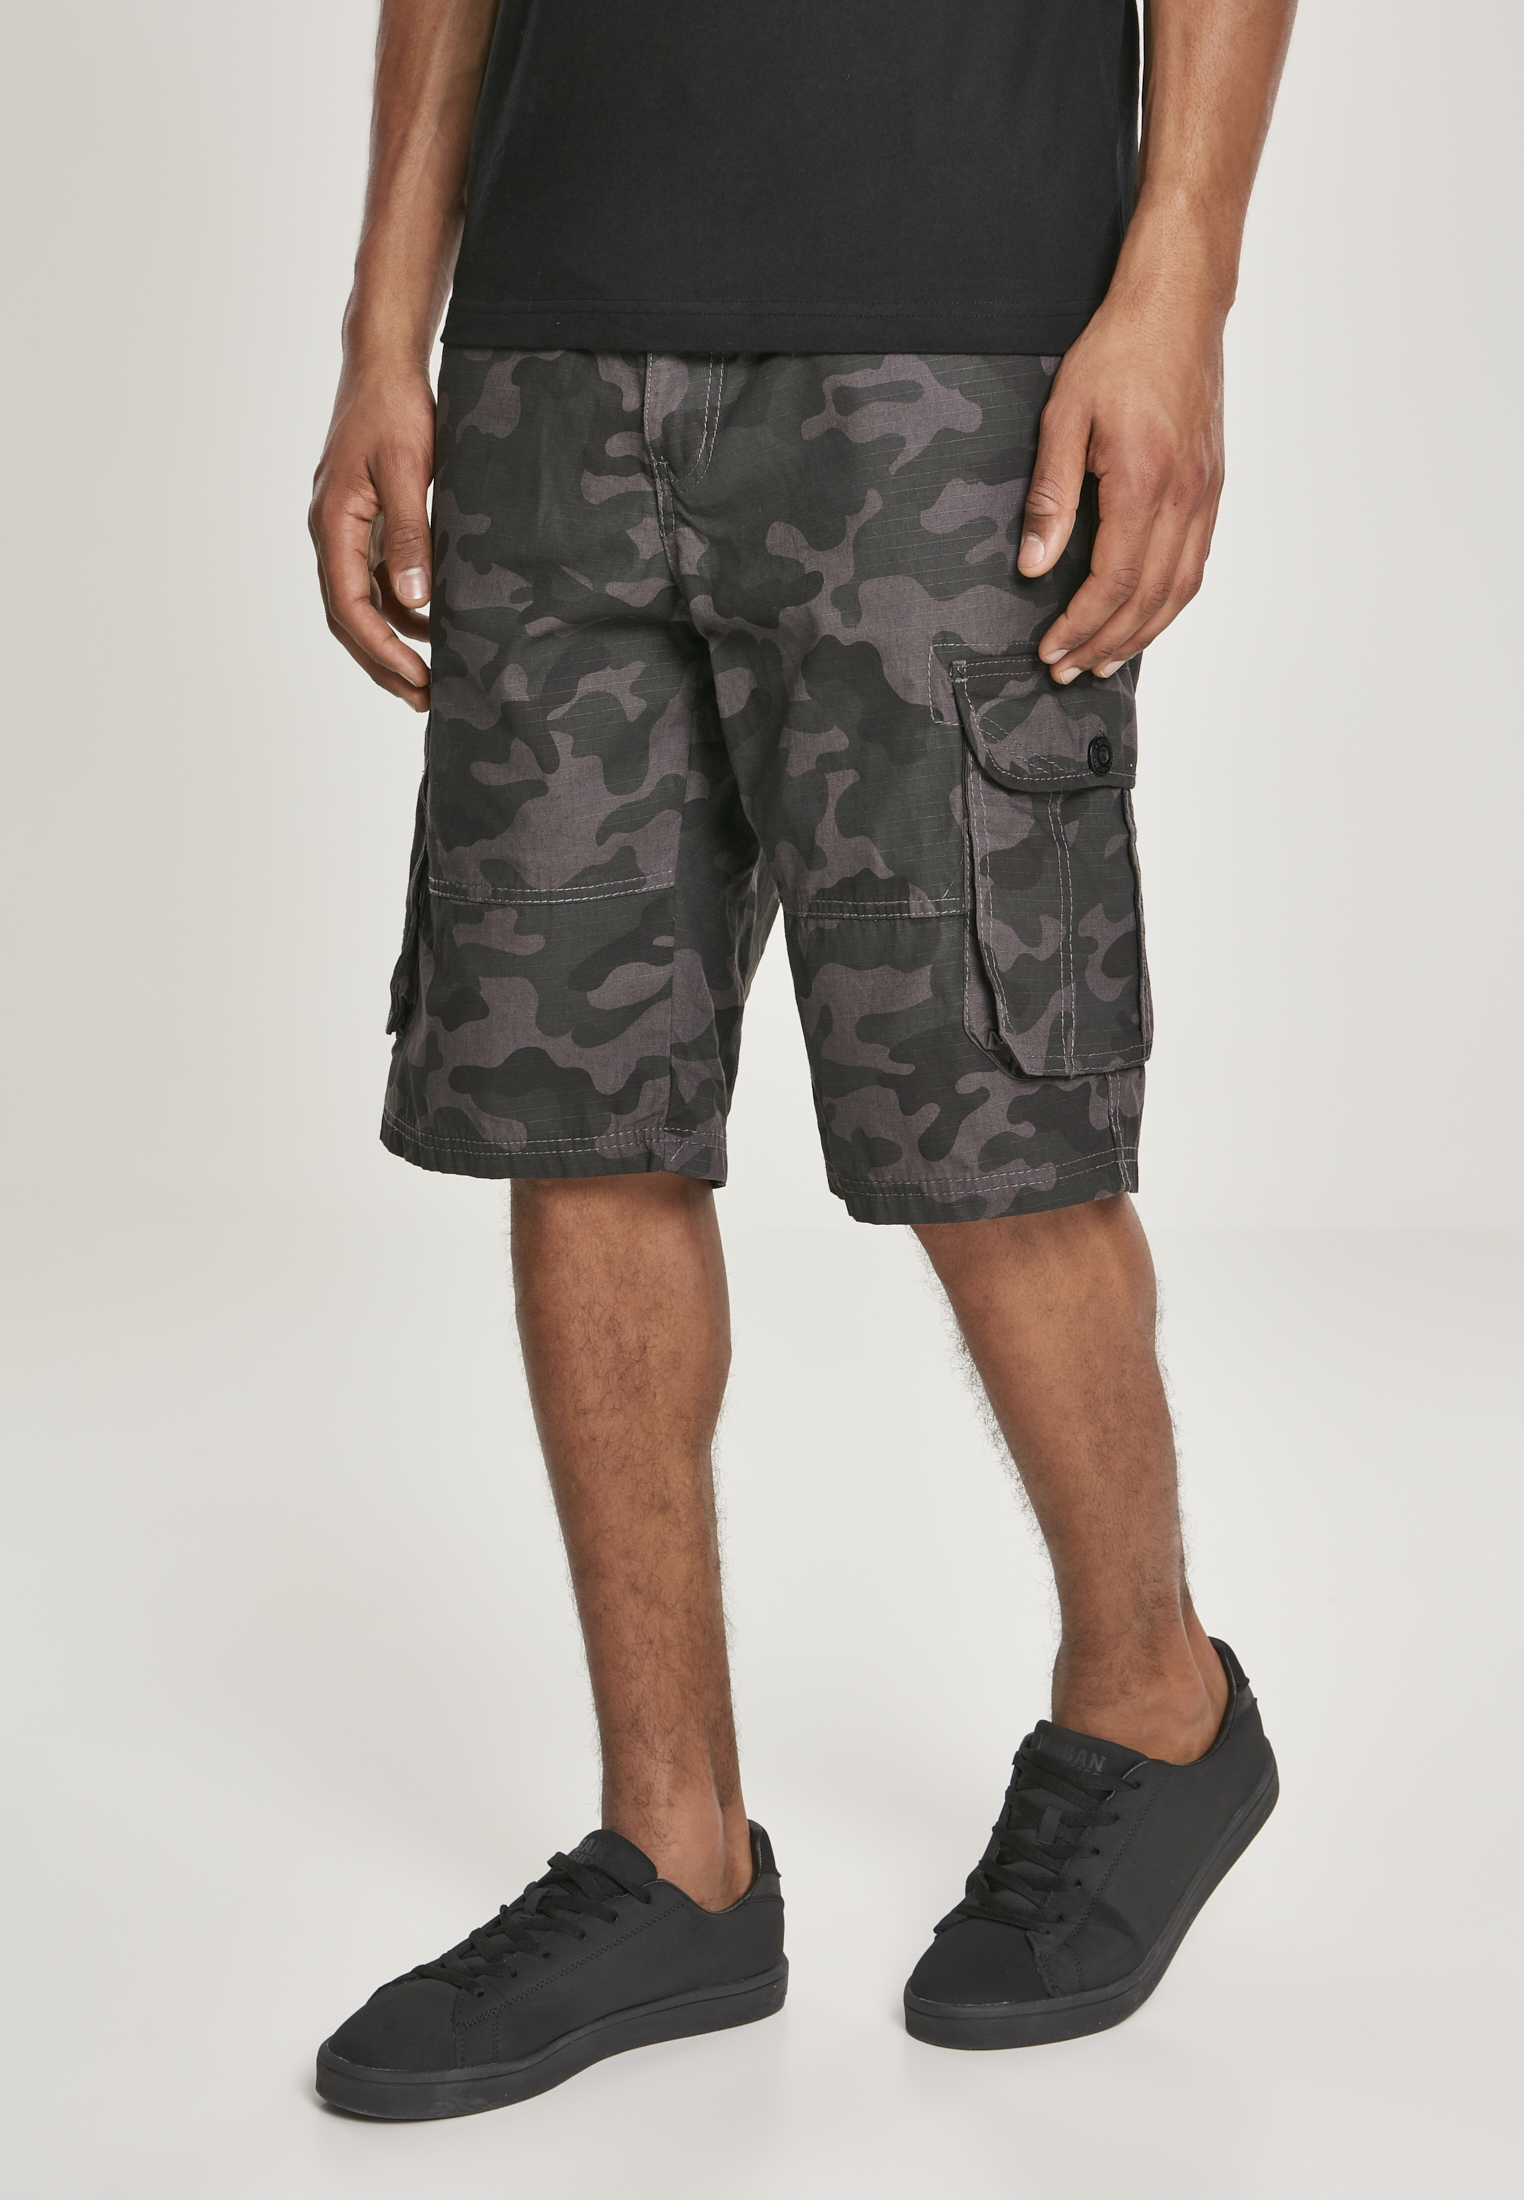 Victorious Men's Belted Ripstop Twill Camo Cargo Short 